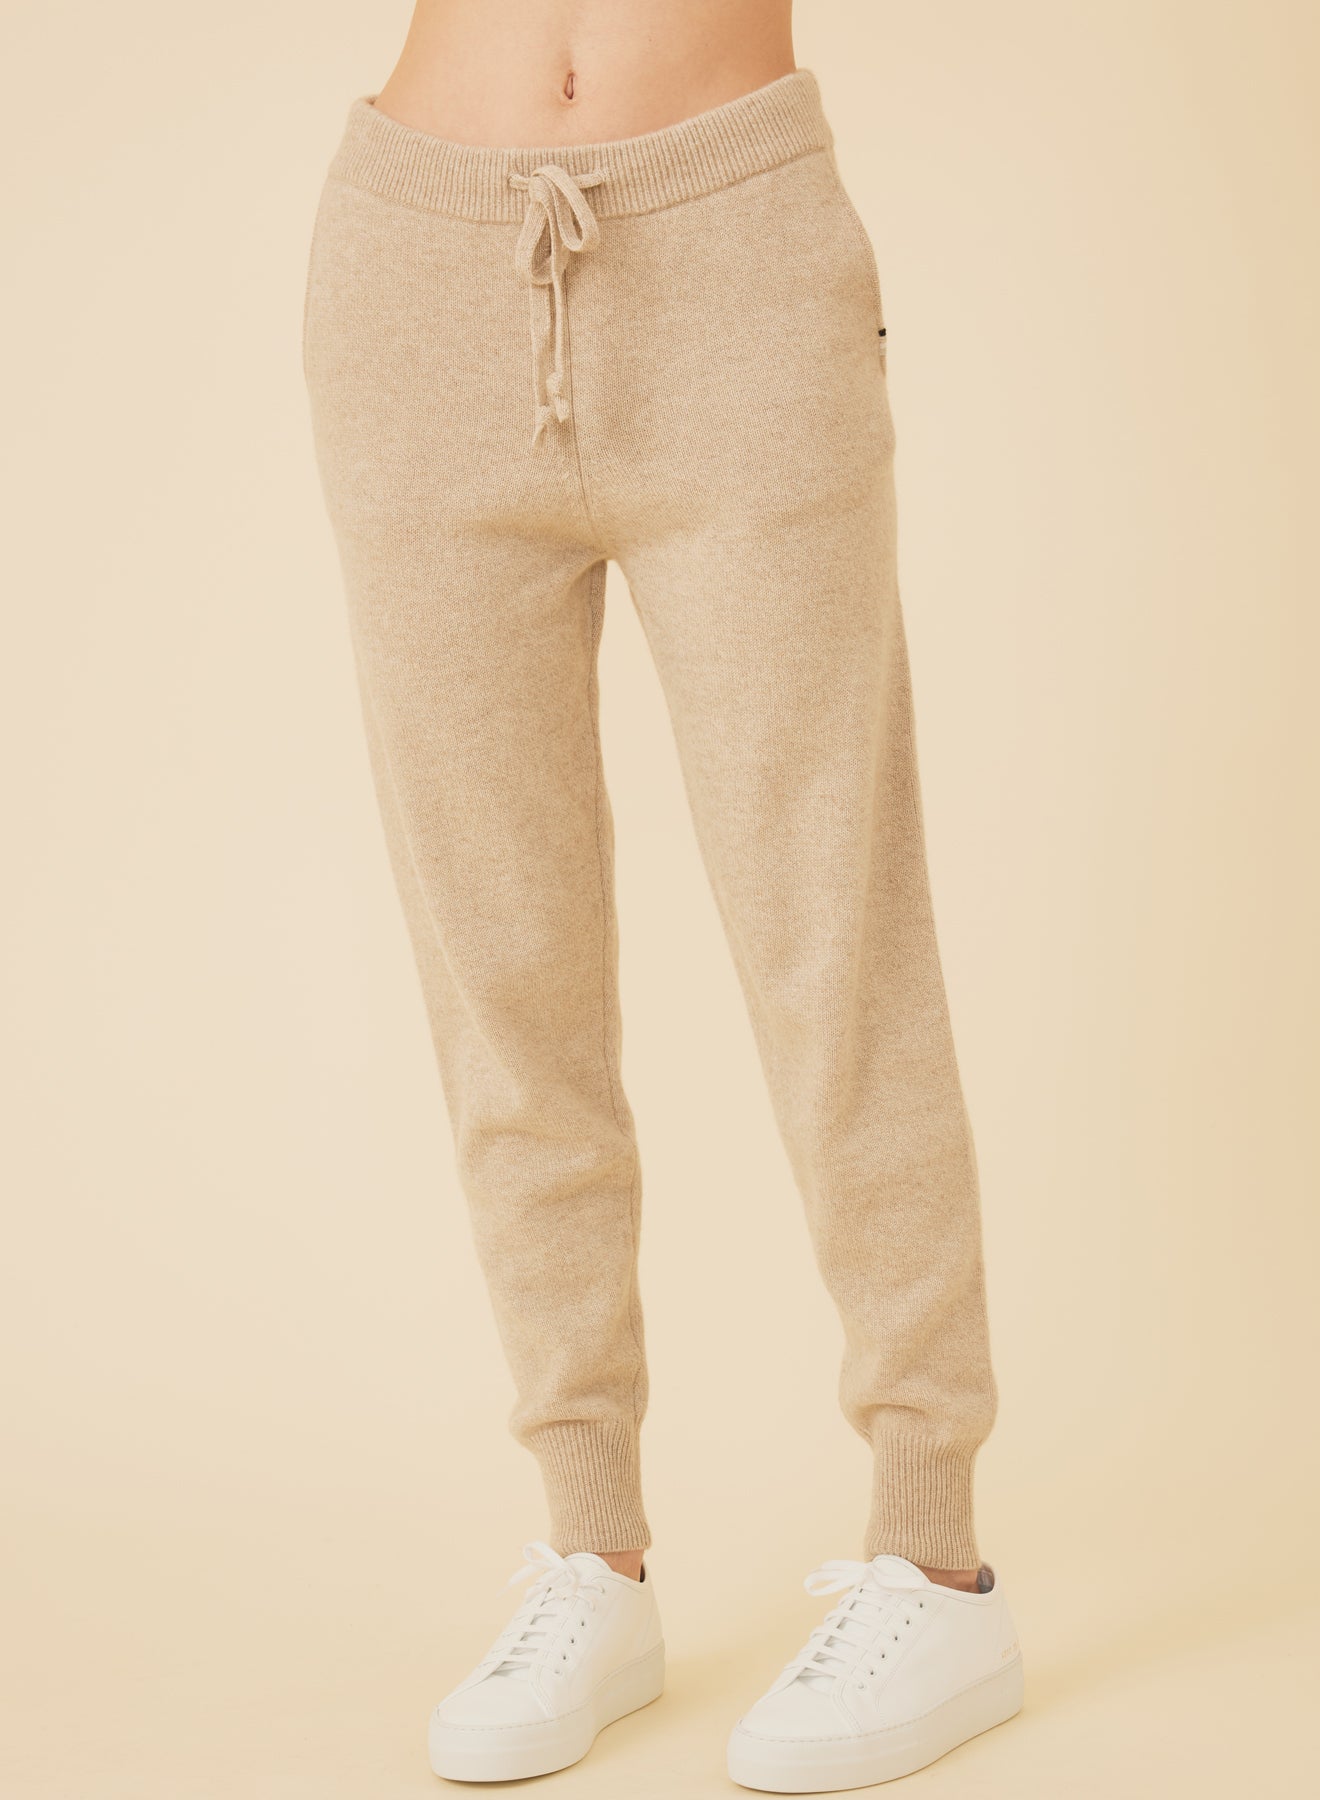 One Grey Day Colorado Cashmere Pant